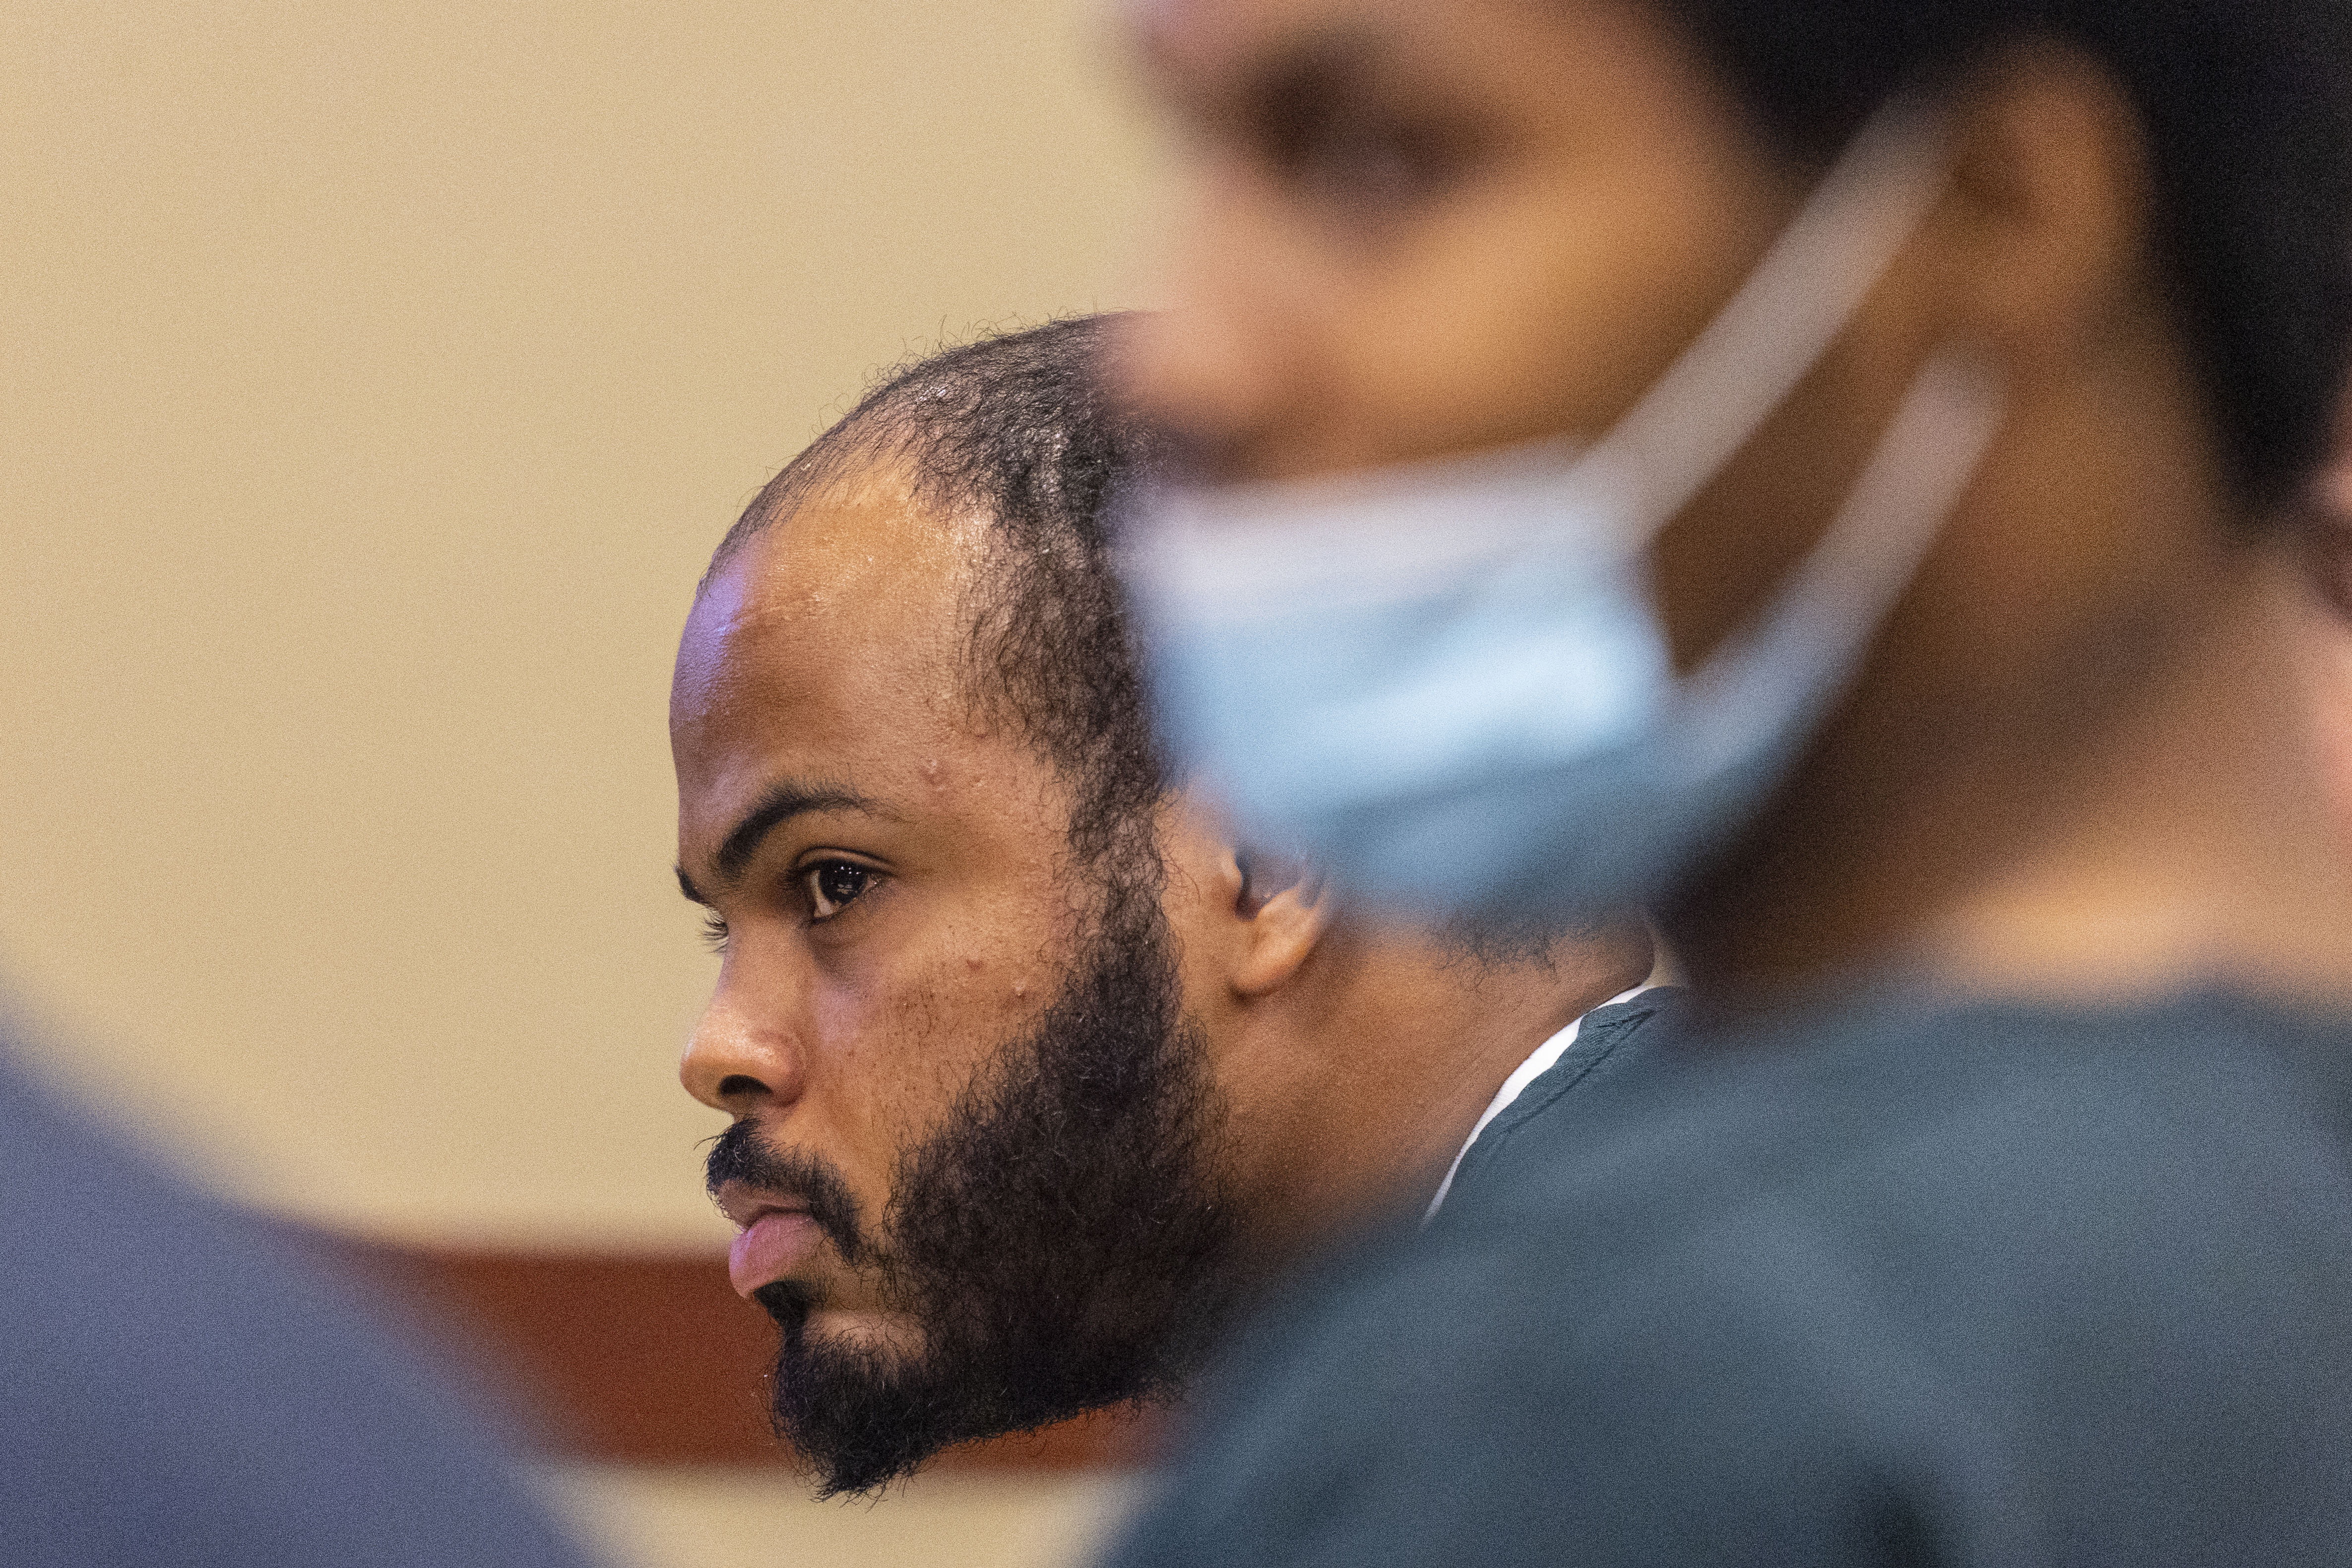 Javonte Rosa, 23,  appears for preliminary examination at the 63rd District Courthouse in Grand Rapids, Michigan on Thursday, June 30, 2022. The trio of defendants appeared in court, (not pictured Rishy Manning, 22, and Jaheim Hayes—Goree, 20) are charged with felony murder in the shooting death of Joseph Wilder, 50, who was shot and killed during a robbery attempt at a Huntington Bank ATM on South Division Avenue in May of 2022. (Joel Bissell | MLive.com)